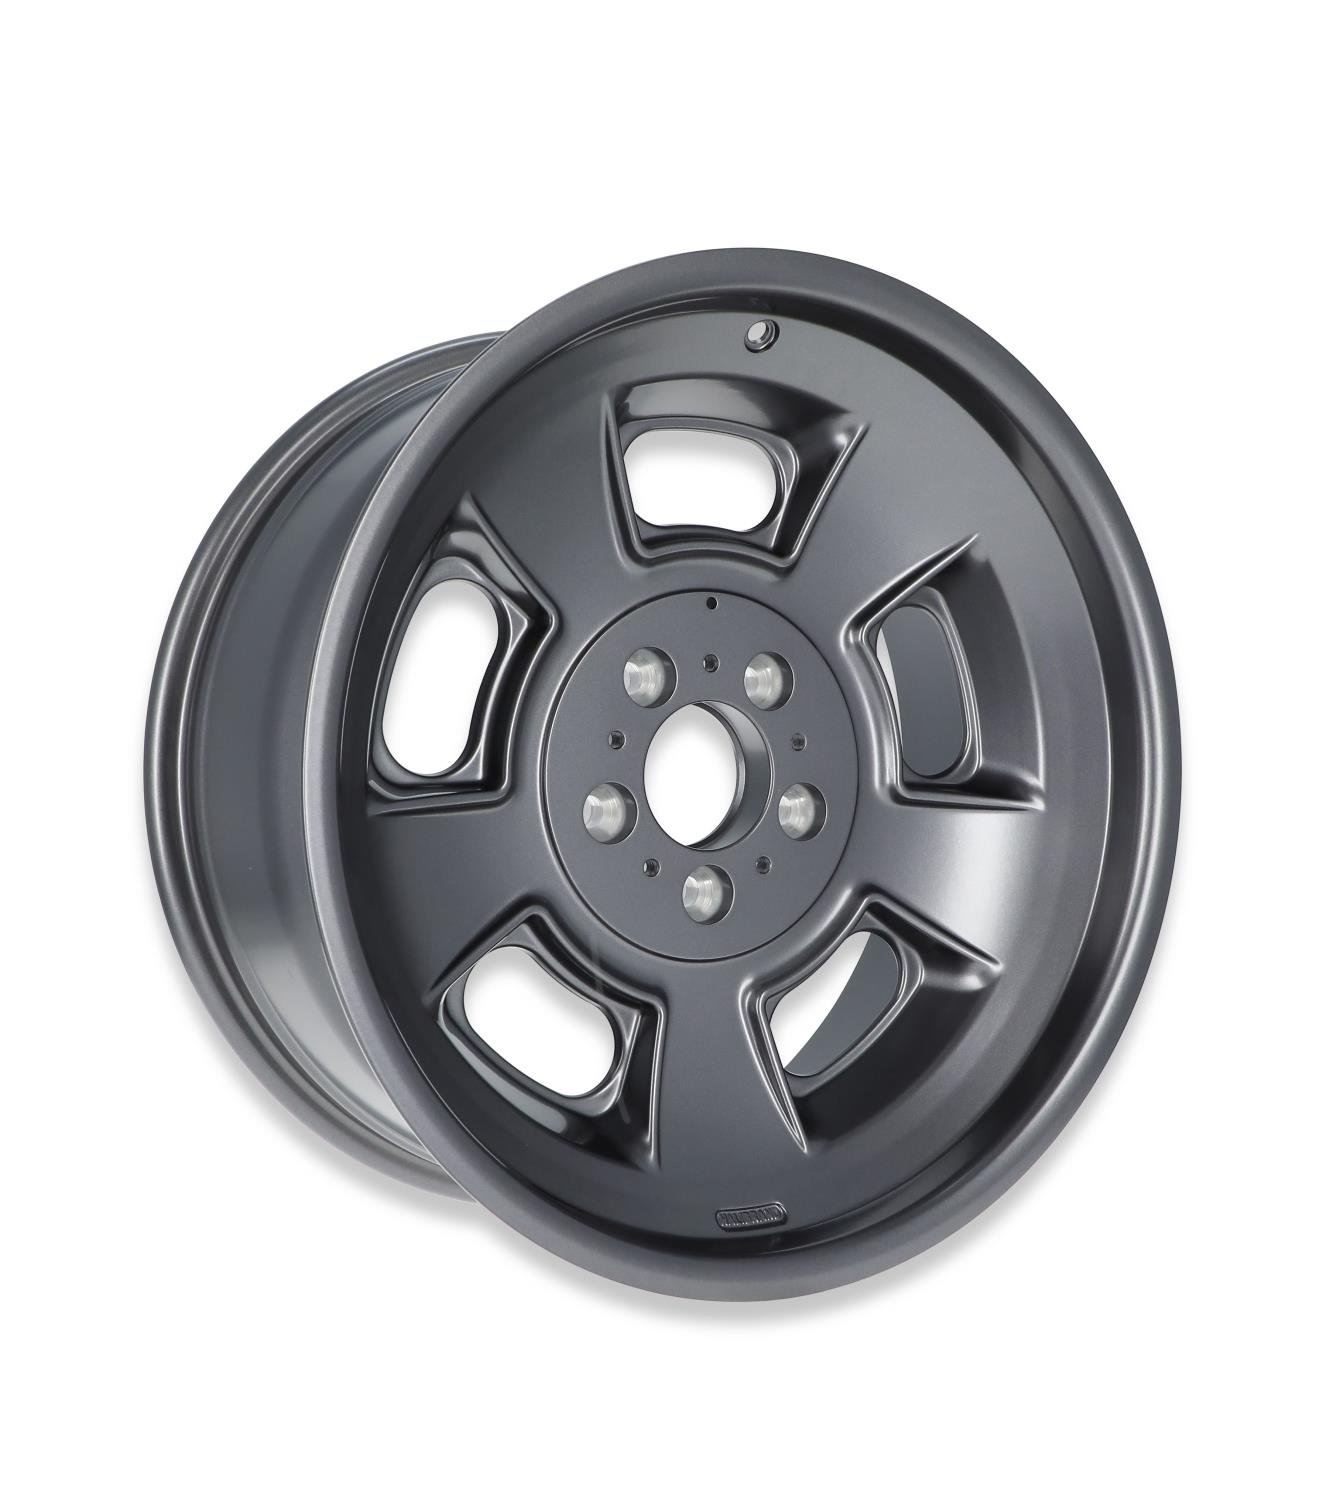 Sprint Front Wheel, Size: 19x8.5", Bolt Pattern: 5x5", Backspace: 4.5", Anthracite - Semi Gloss Clearcoat]